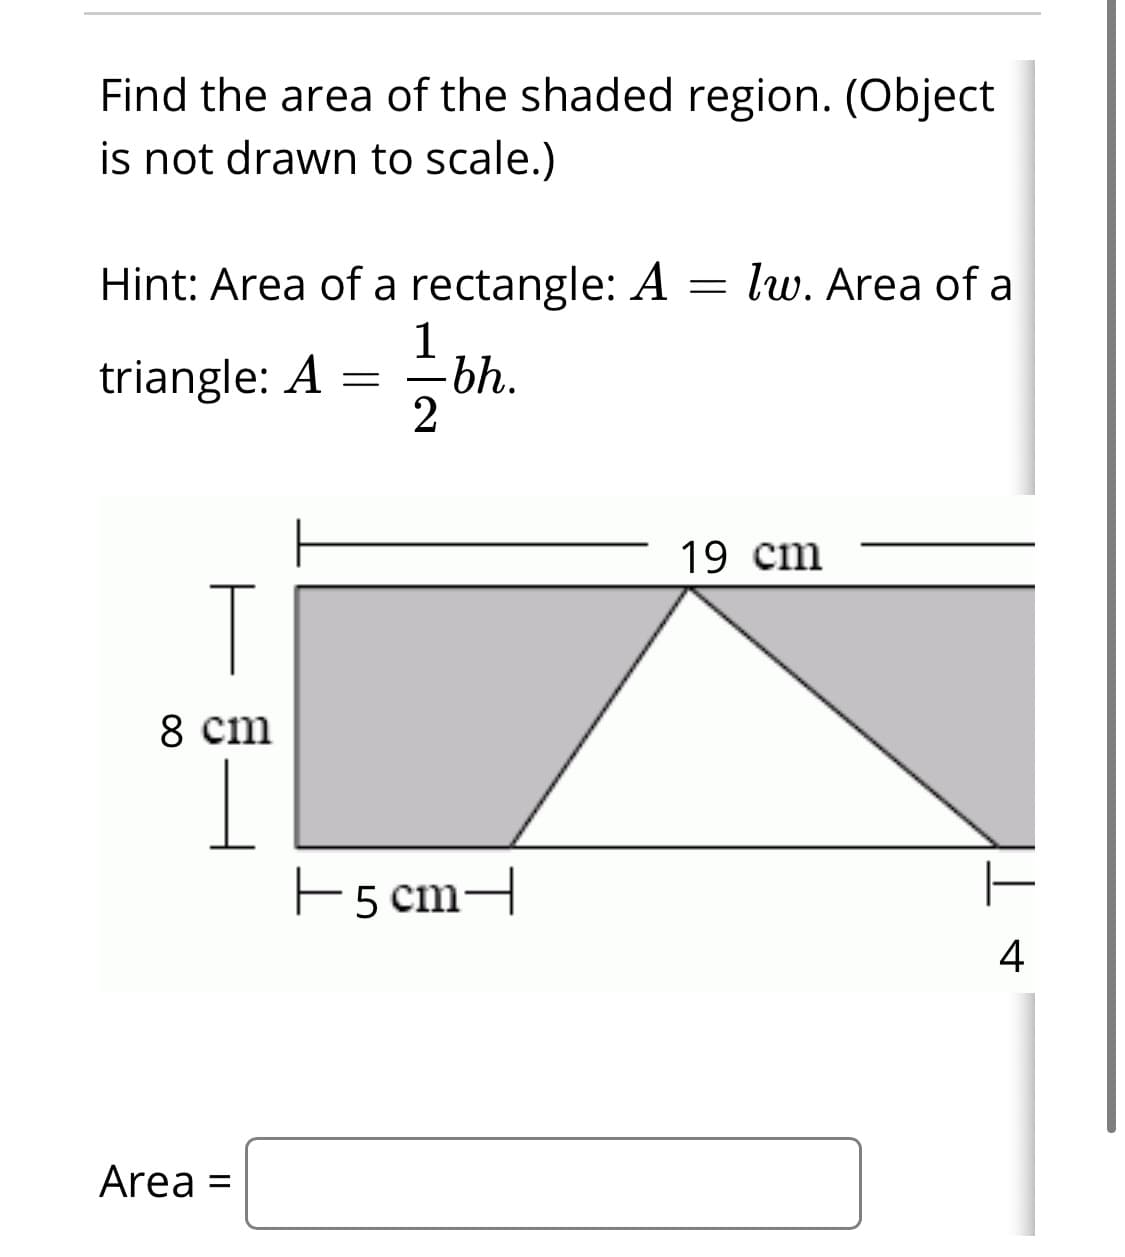 Find the area of the shaded region. (Object
is not drawn to scale.)
Hint: Area of a rectangle: A = lw. Area of a
1
triangle: A
-bh.
19 cm
8 cm
EscmH
4
Area
%3D
